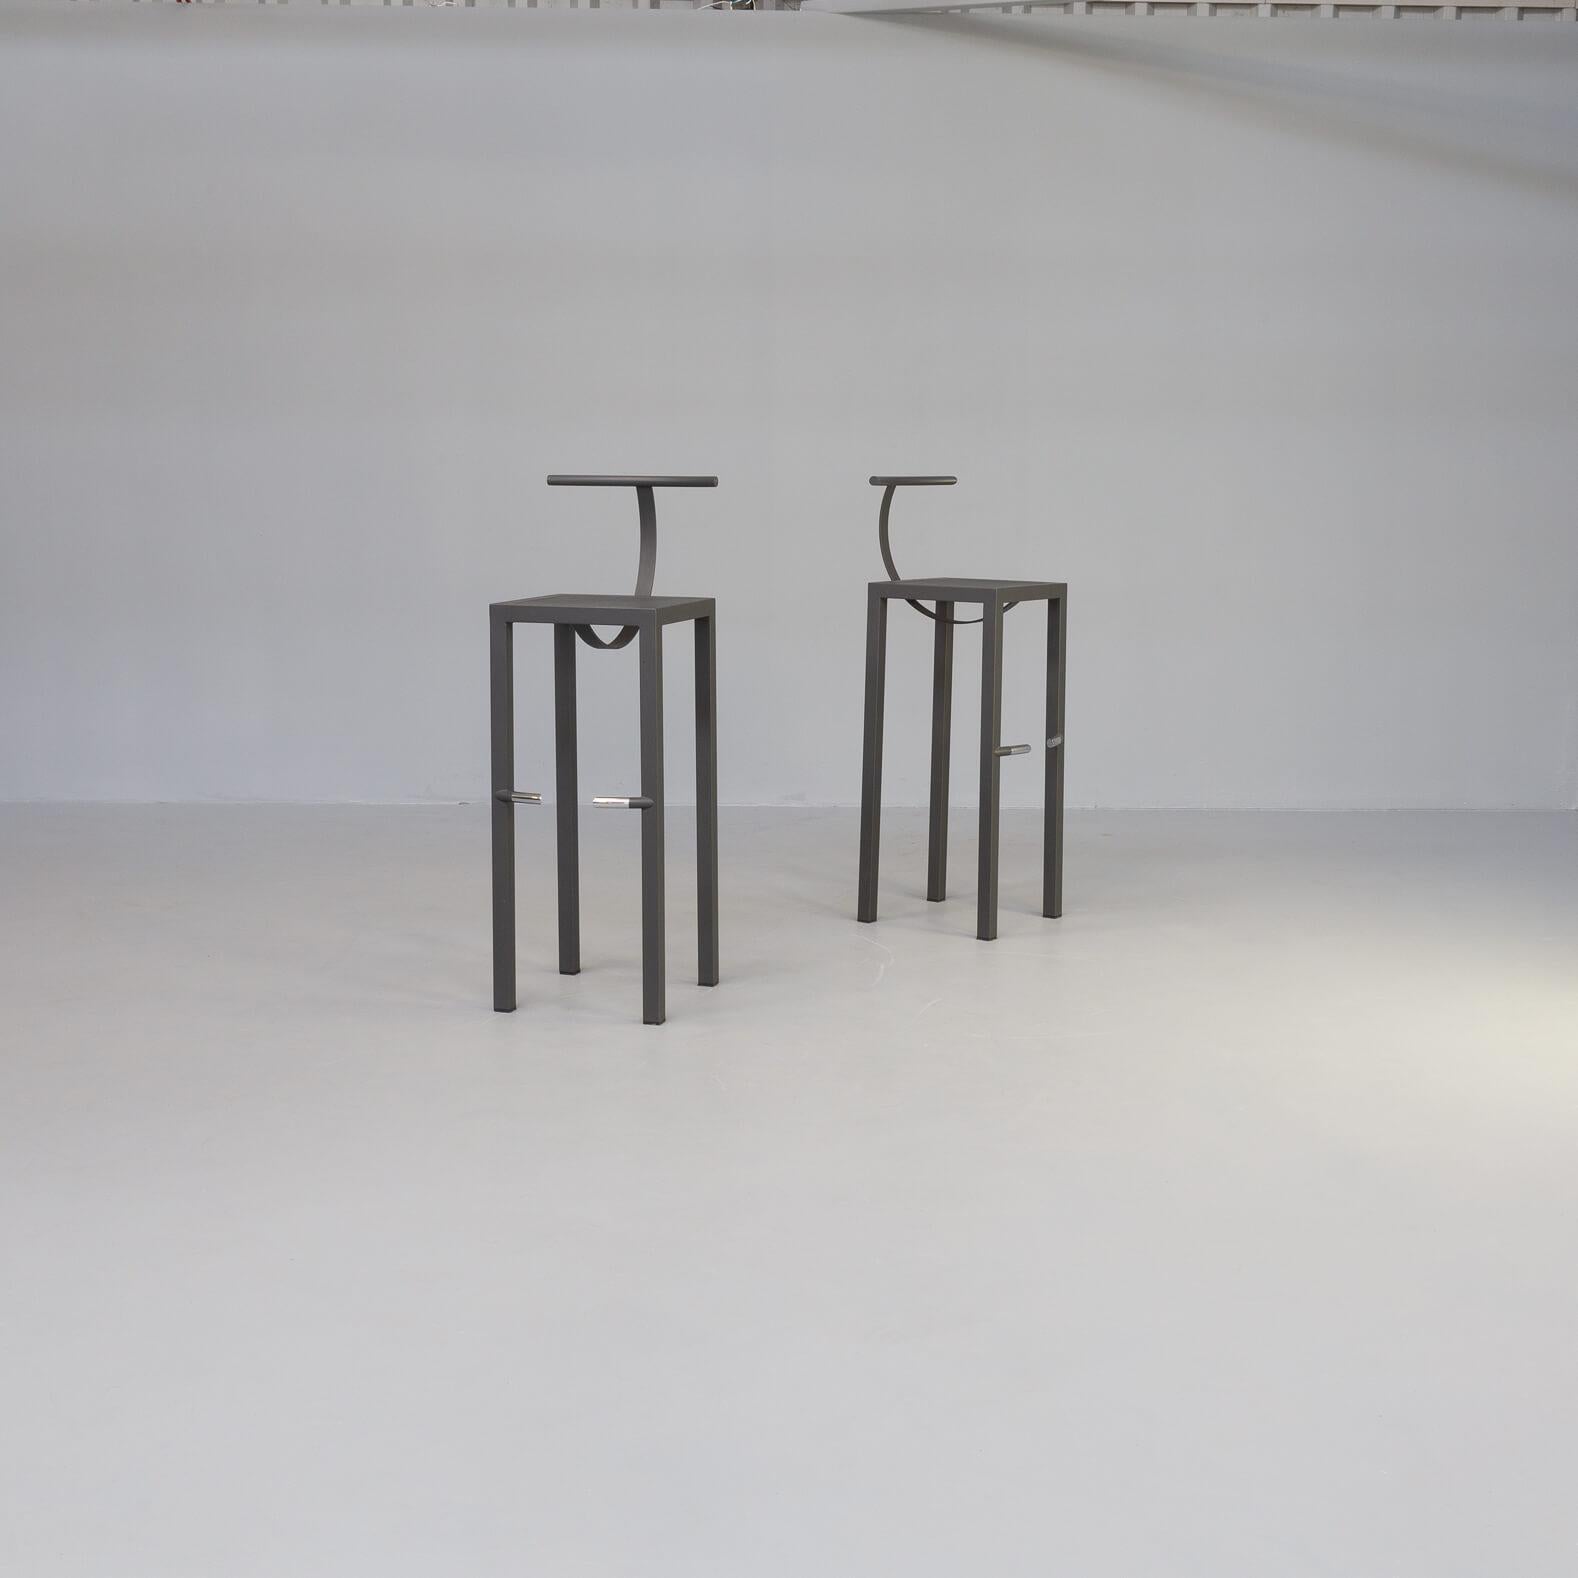 Philippe Starck designed the saparis stool in the 1980s combining straight and round forms together. Tubular steel frame mesh seat and half cirkel round backrest. The stools have been available in two heights. This version concerns the 107cm height